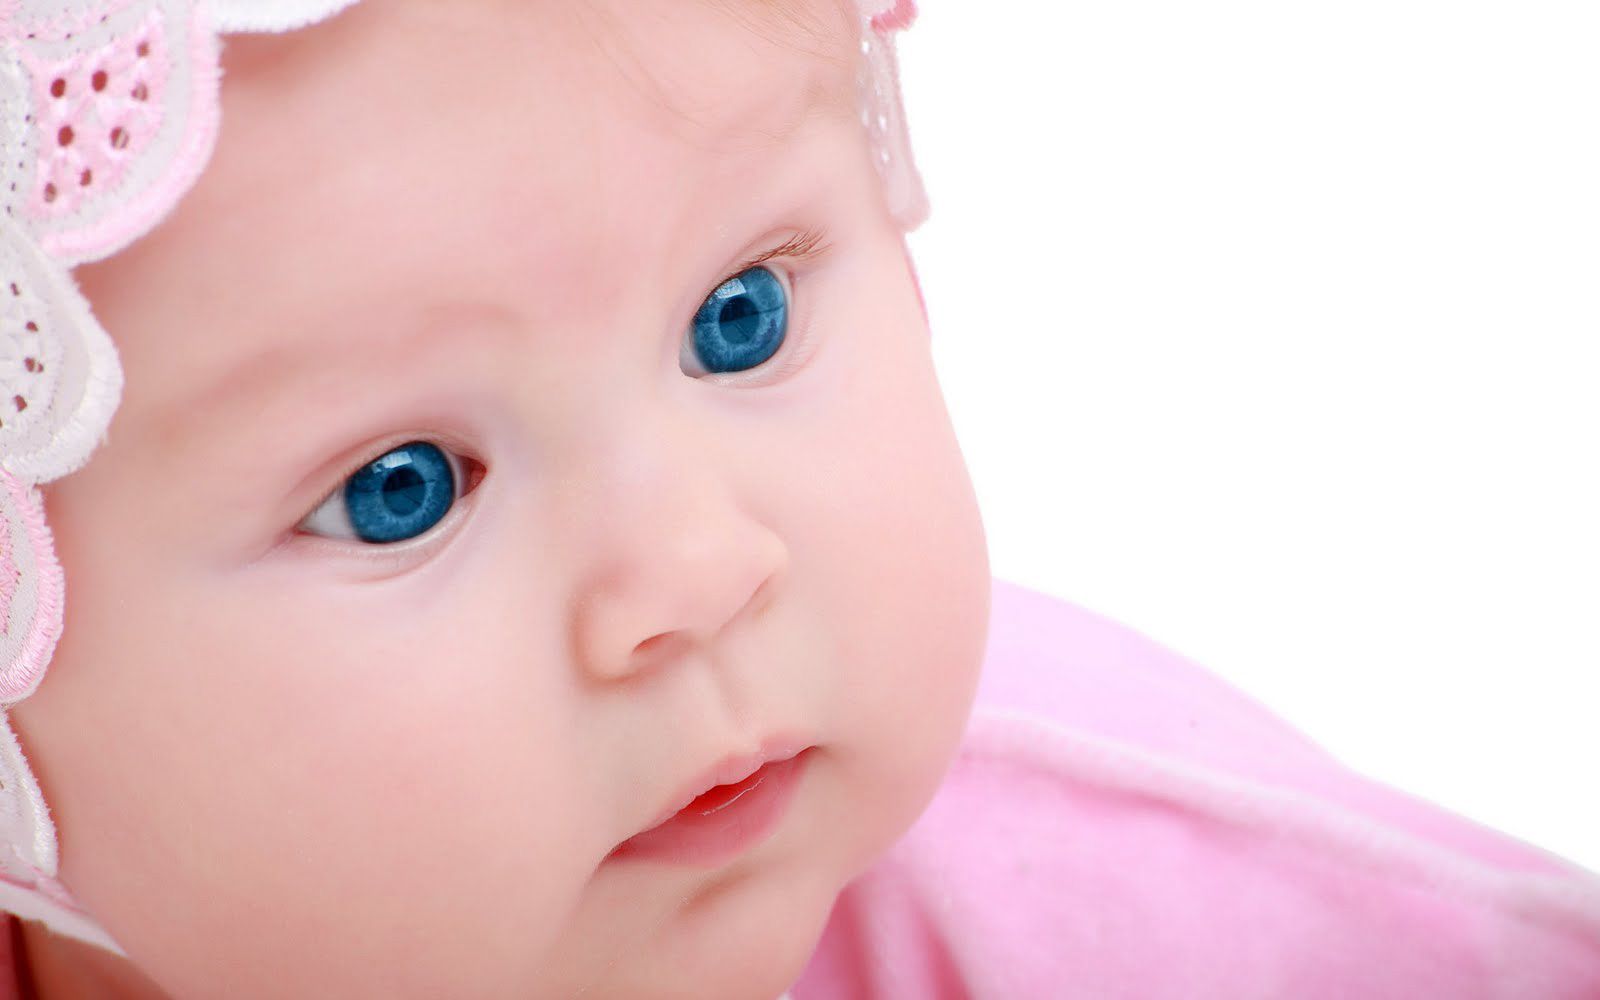 Girl In Pink Clothes And Bright Blue Eyes Beautiful Baby Photo Downloads HD Wallpaper